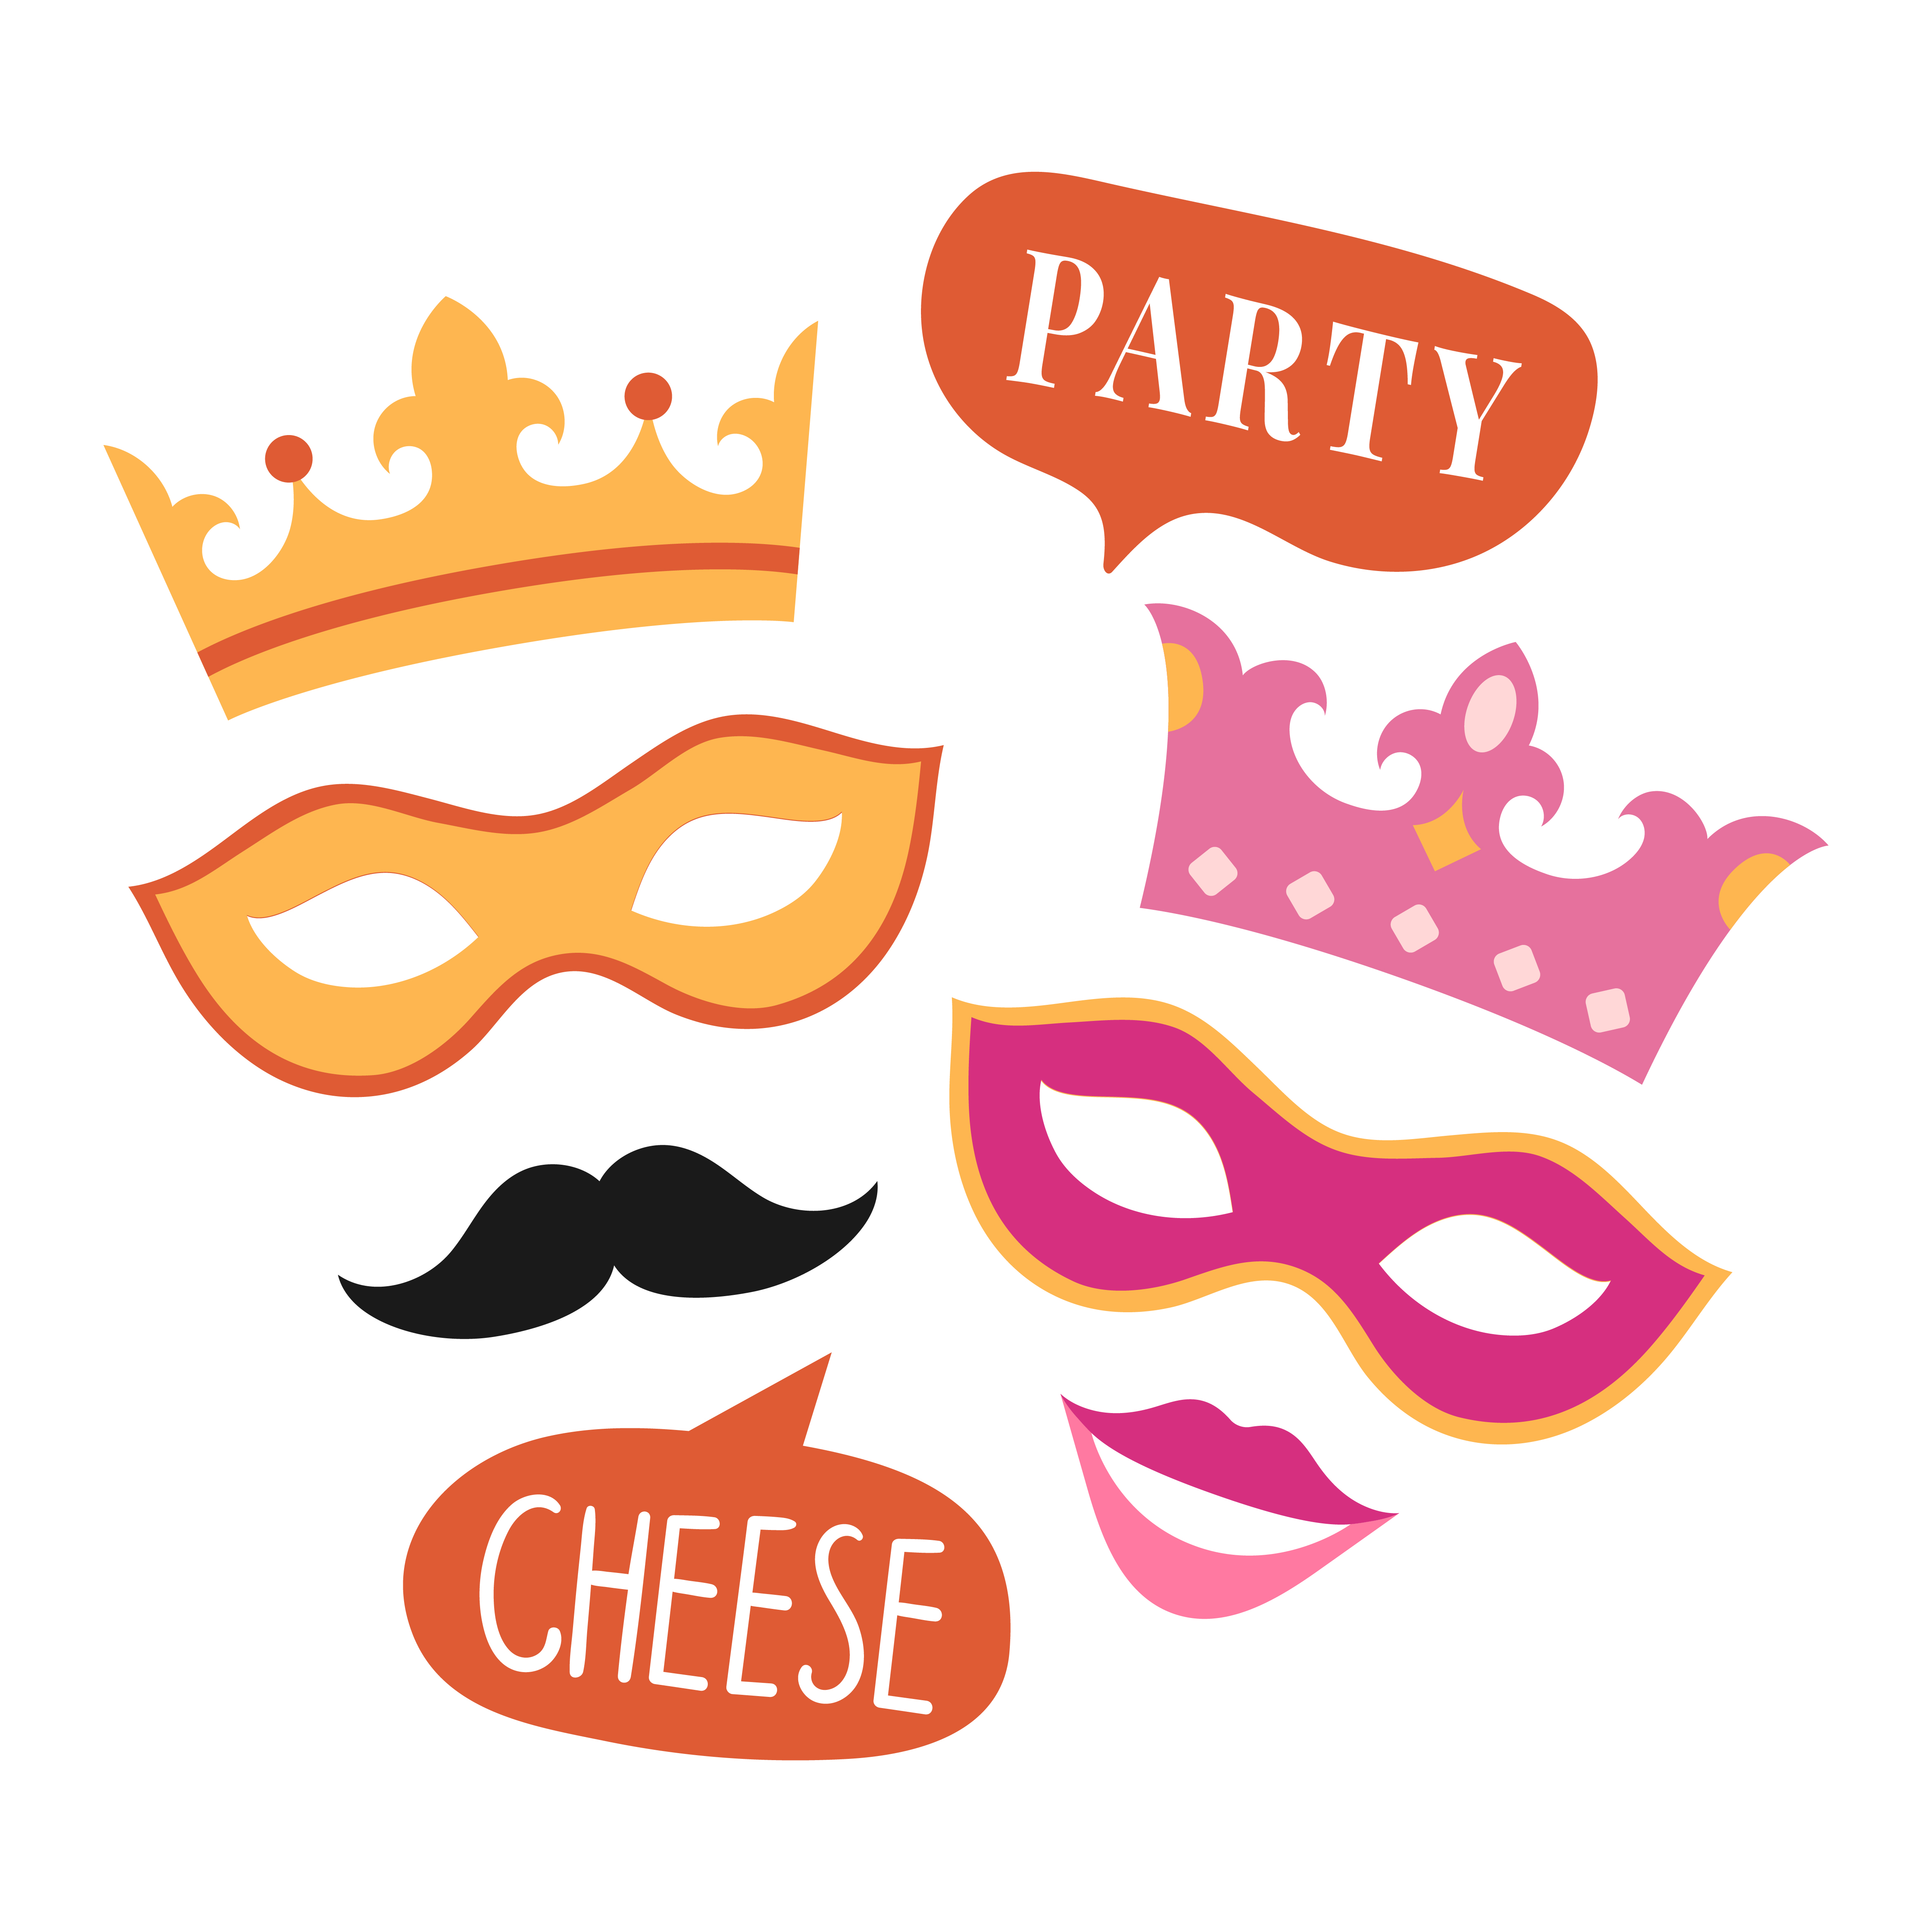 Party photo booth props vector - Download Free Vectors, Clipart ...